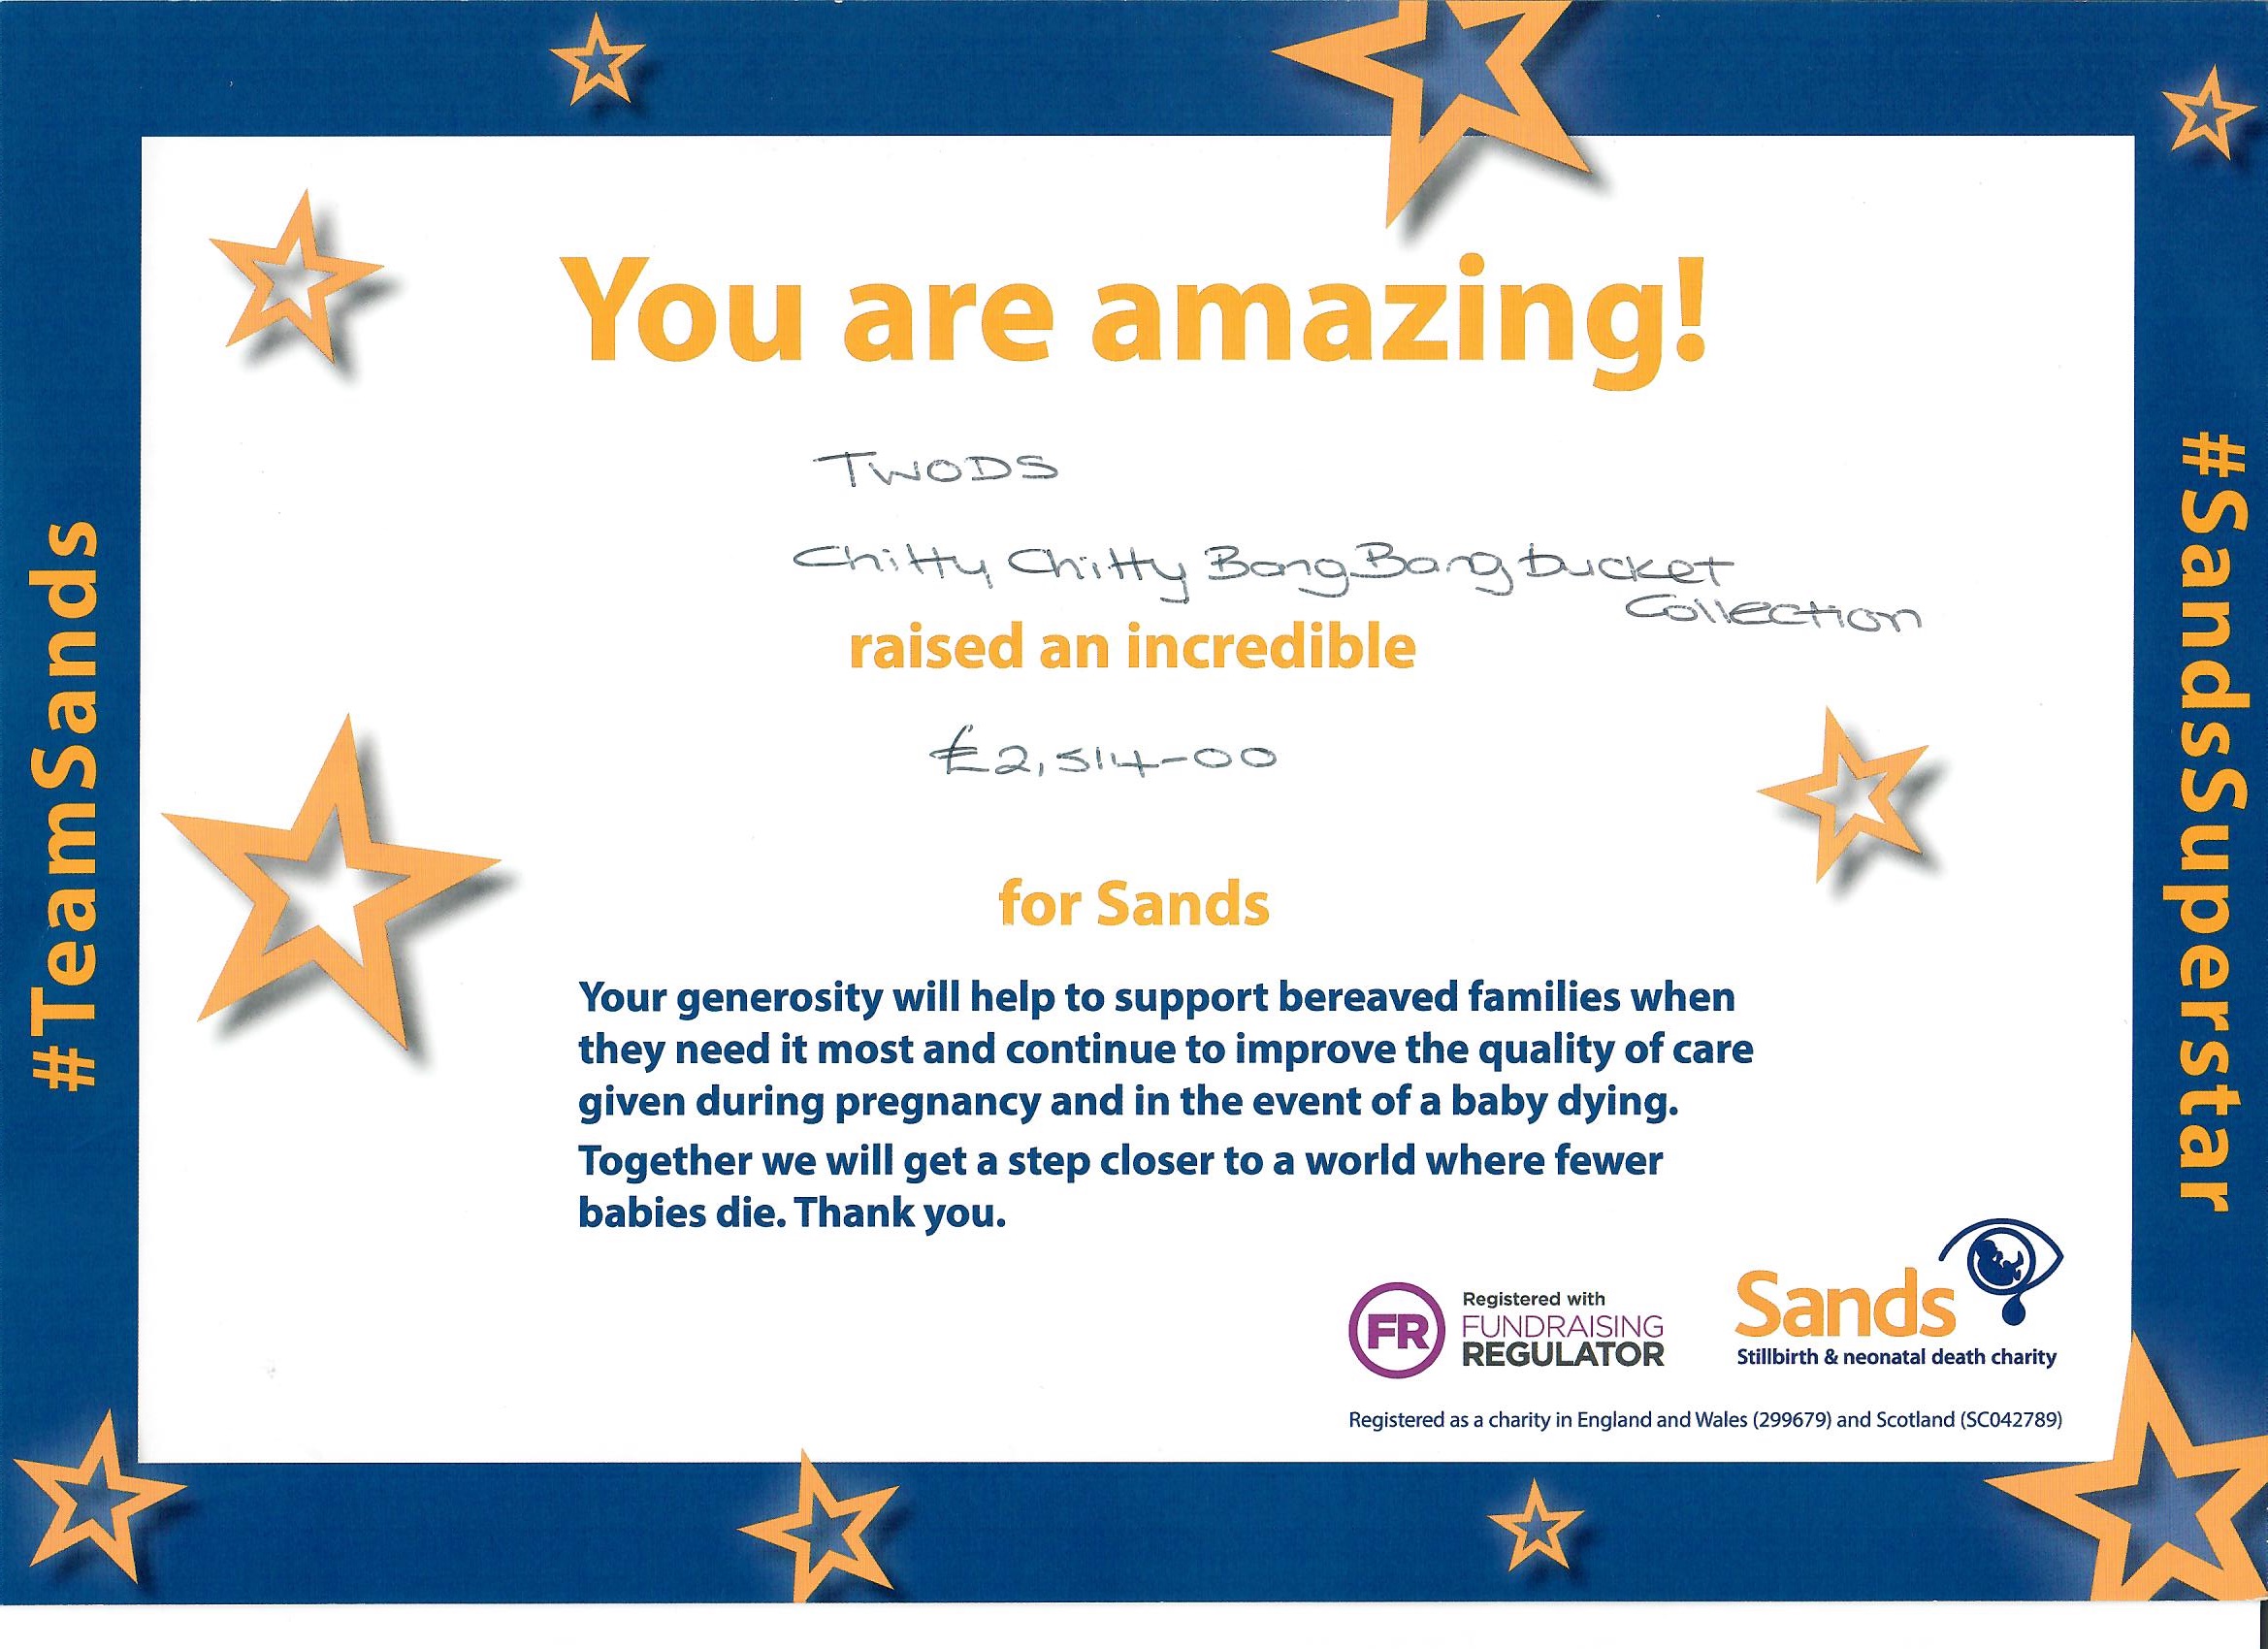 Thank you from SANDS - Chitty Chitty Bang Bang Bucket Collections